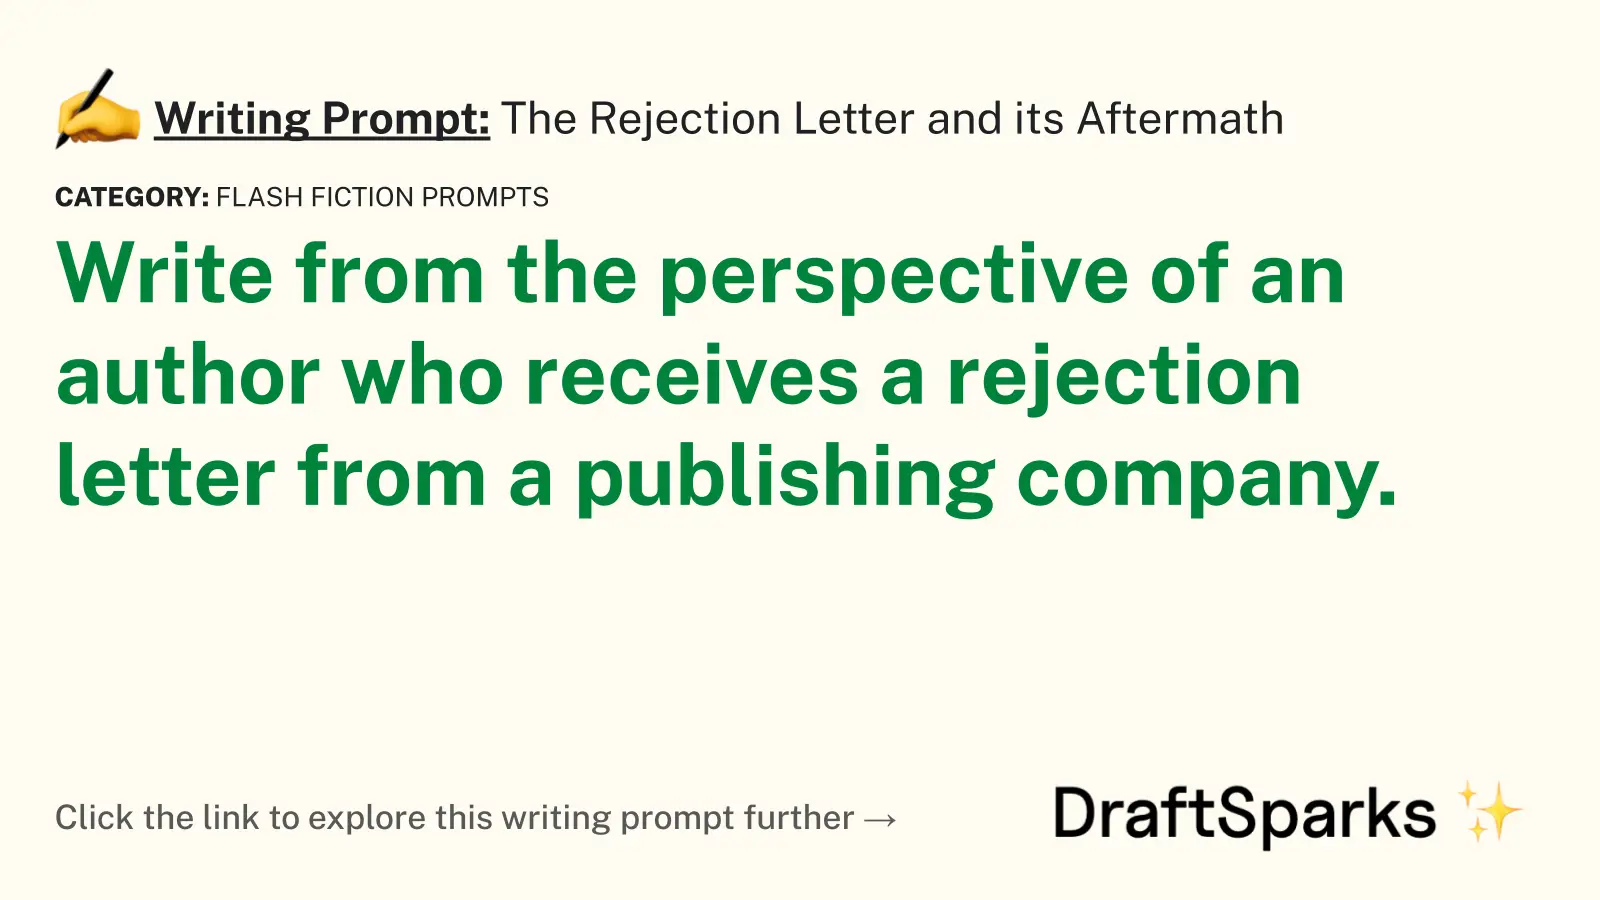 The Rejection Letter and its Aftermath